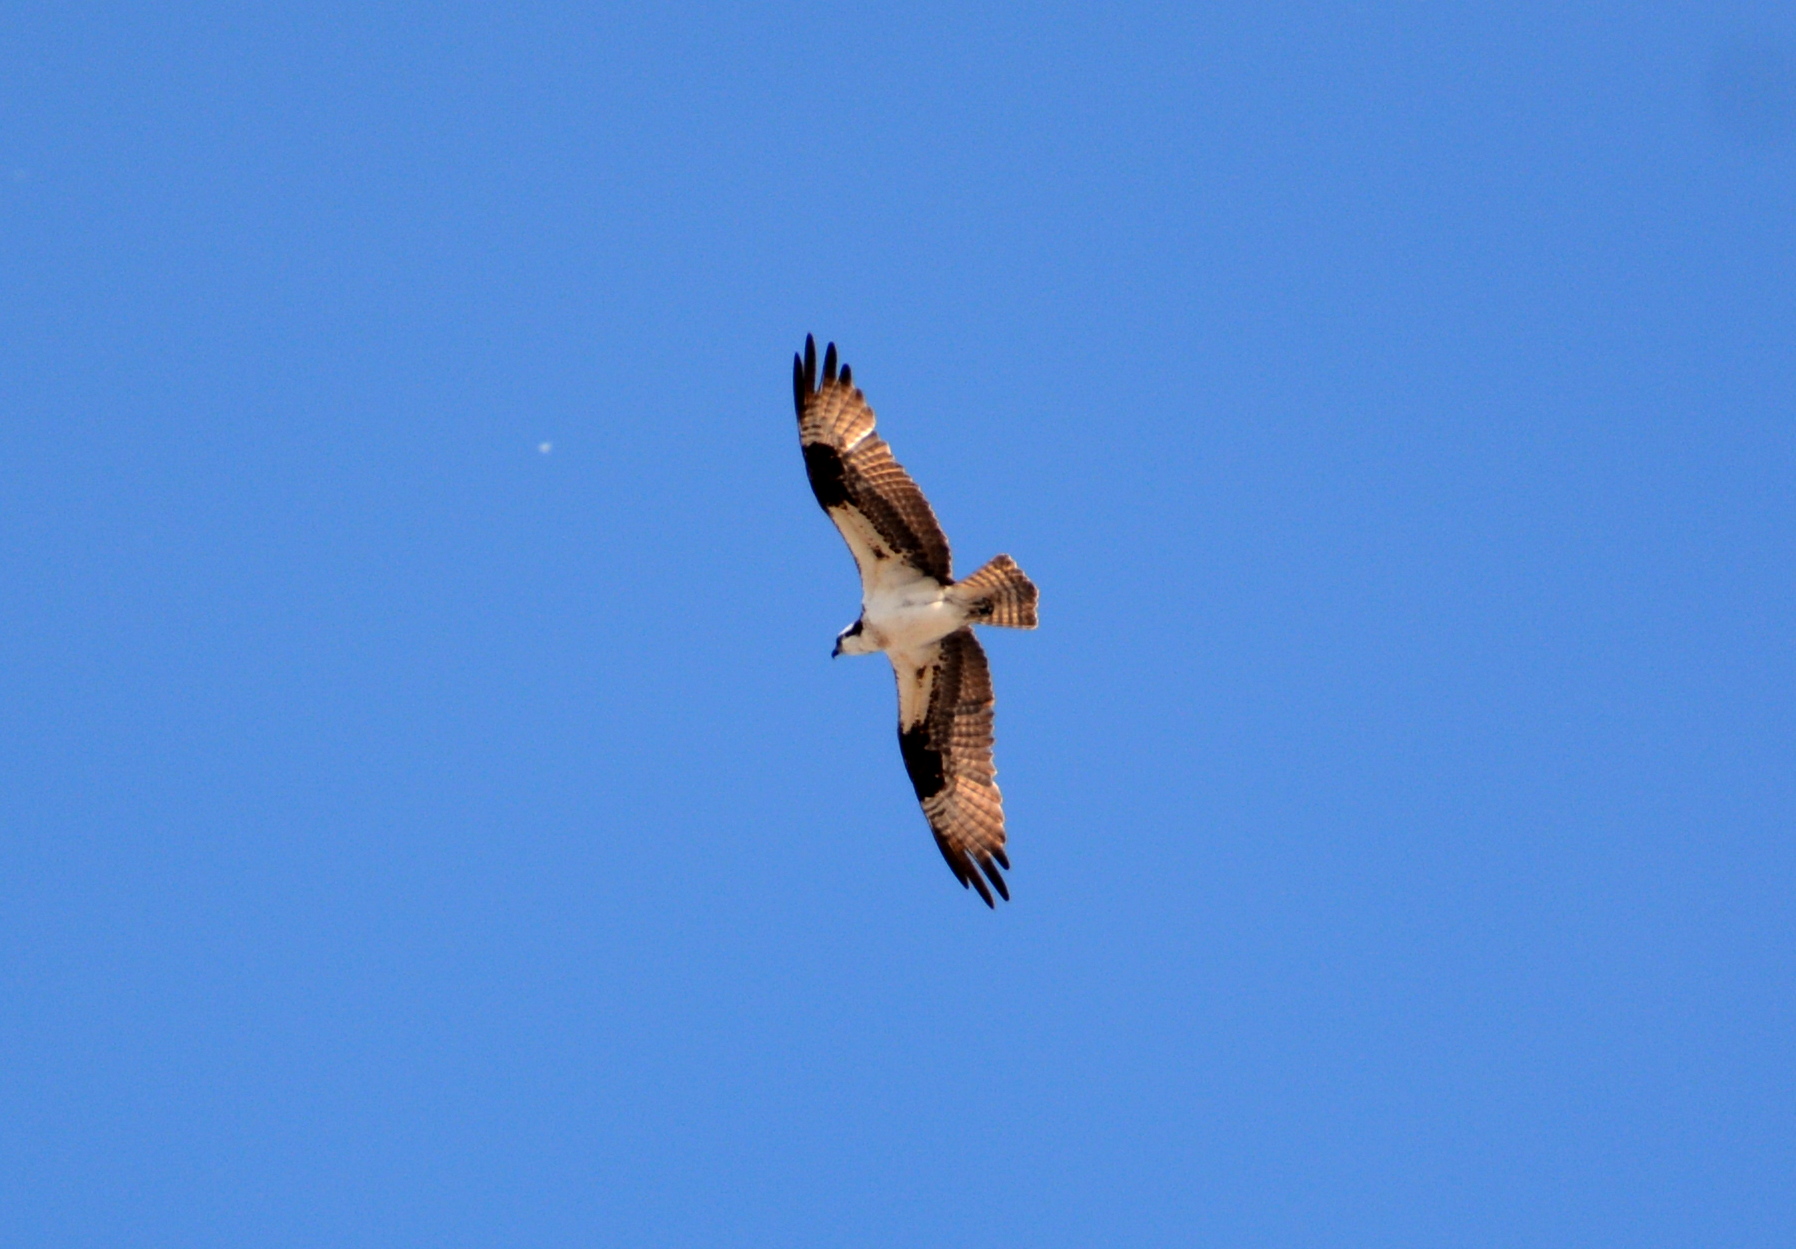 On of several Osprey that came through the canyon - this one was not bothered by the falcons